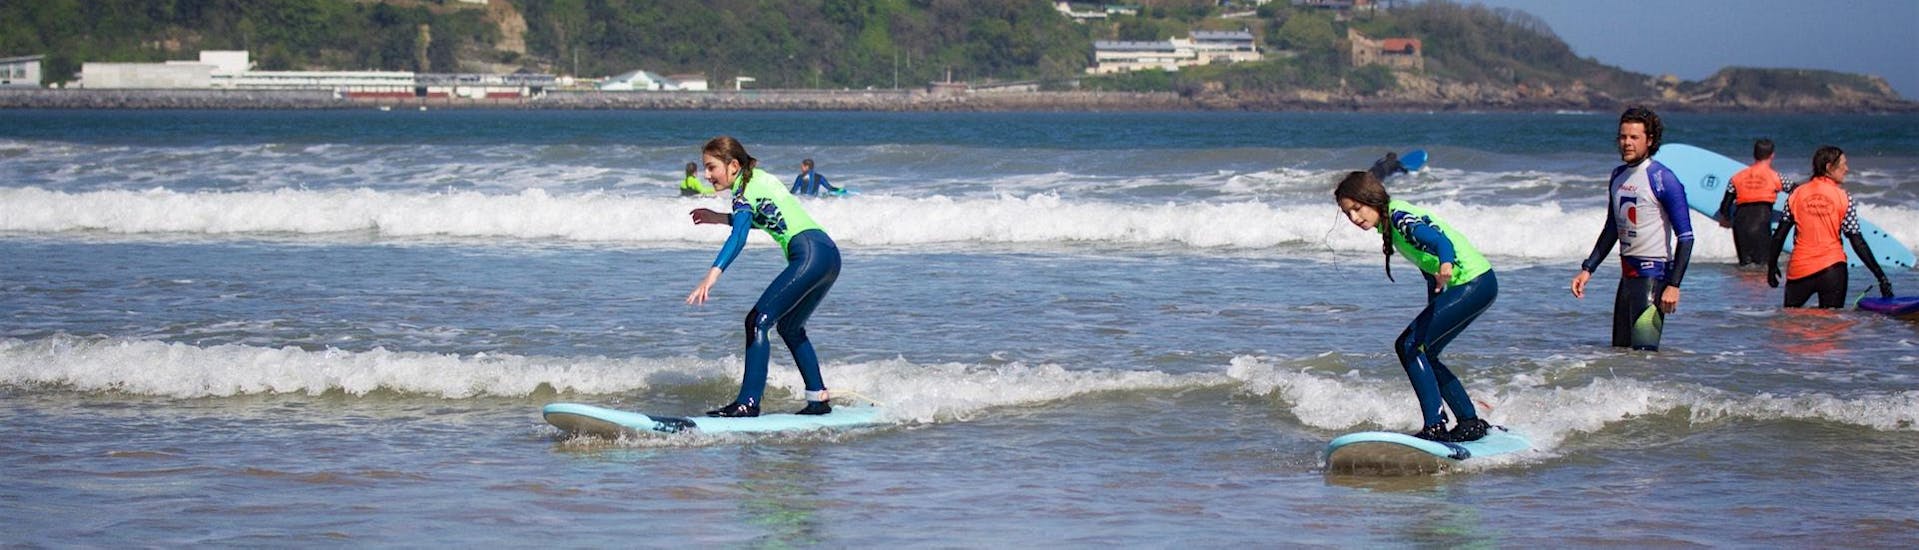 A kid is enjoying the Surfing Lessons - Hendaye Beach - Beginner with Gold Coast Hendaye.